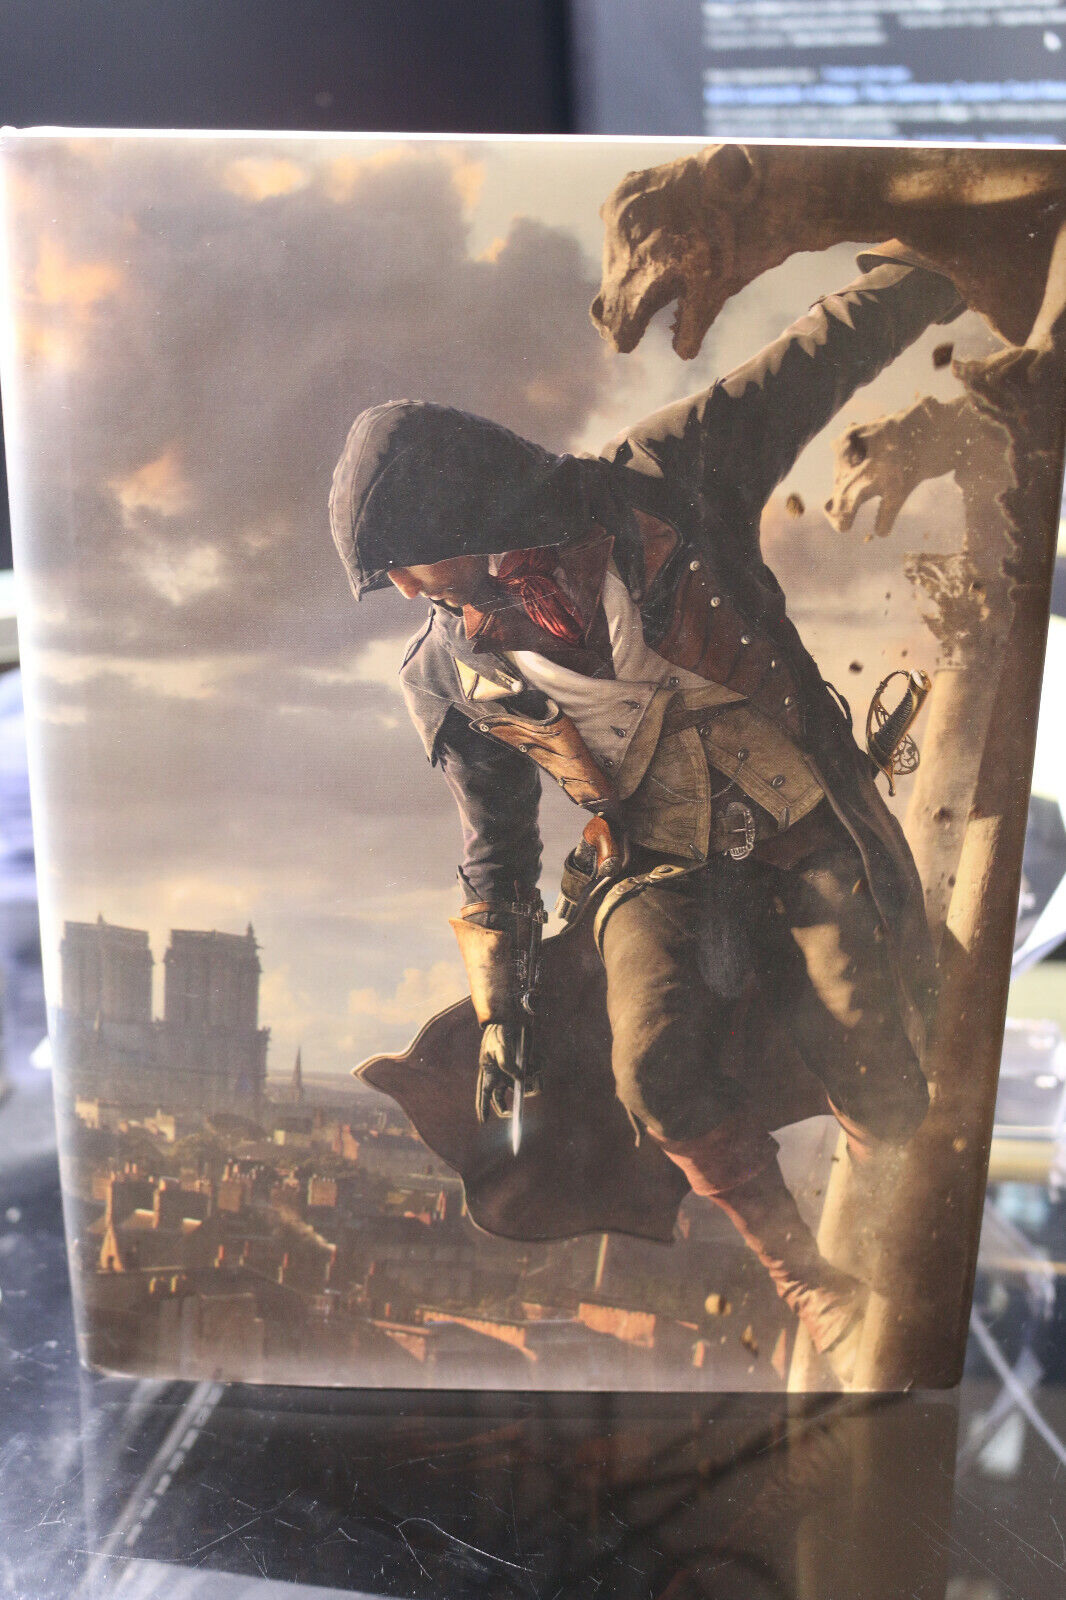 Assassin's Creed III: The Complete Official Guide (Includes Complete Map  Poster)